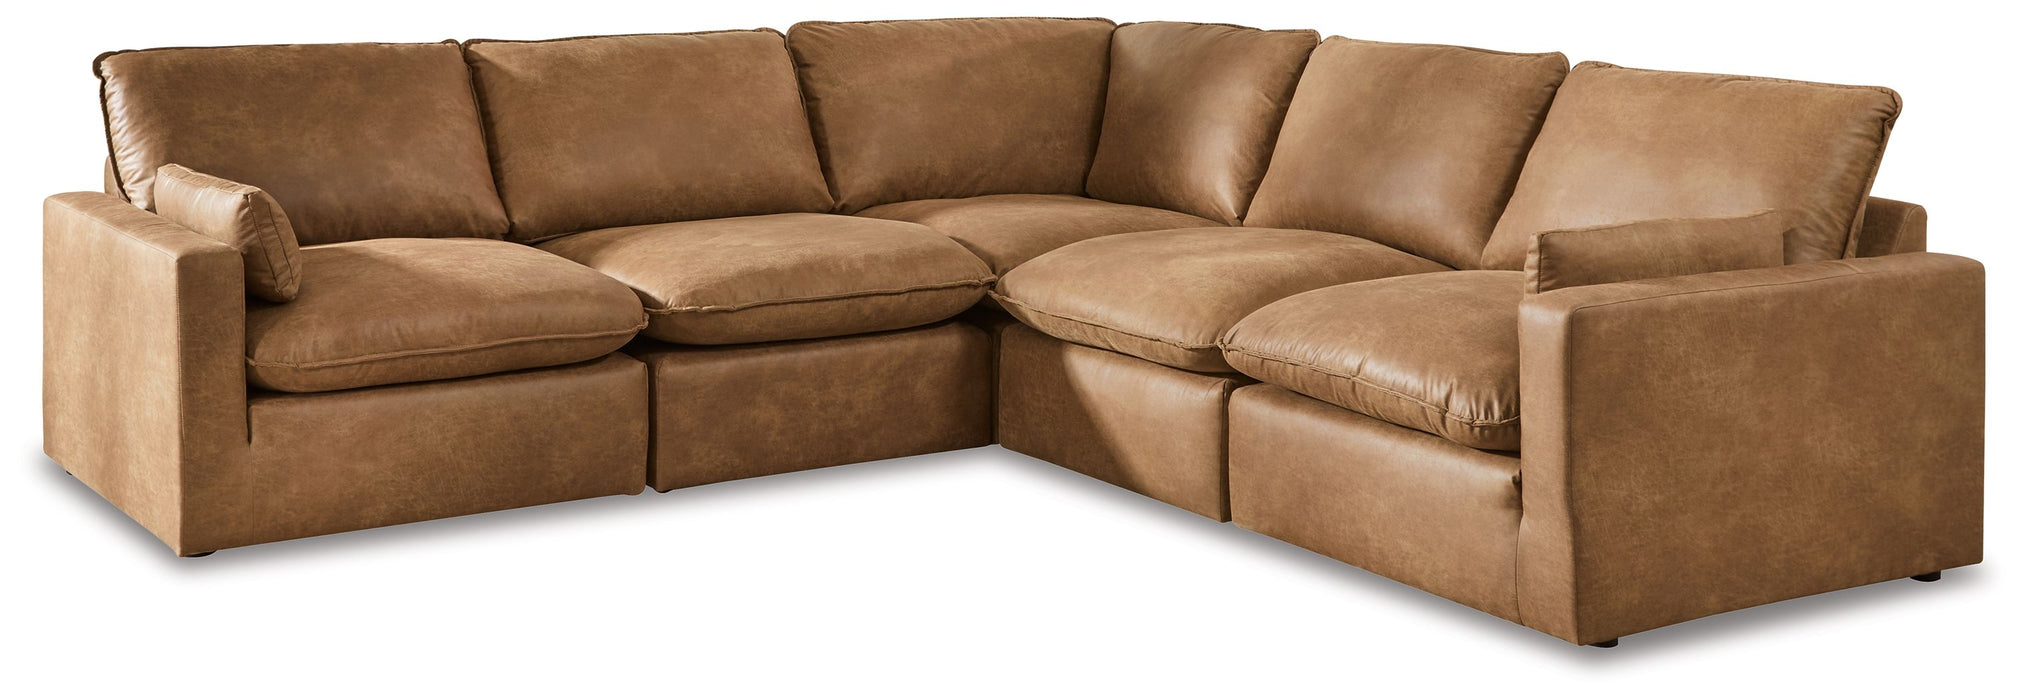 The Marlaina Caramel Sofa 3 Pc Sectional is available at Nashco Furniture &  Mattress Outlet store in Jacksonville, FL.